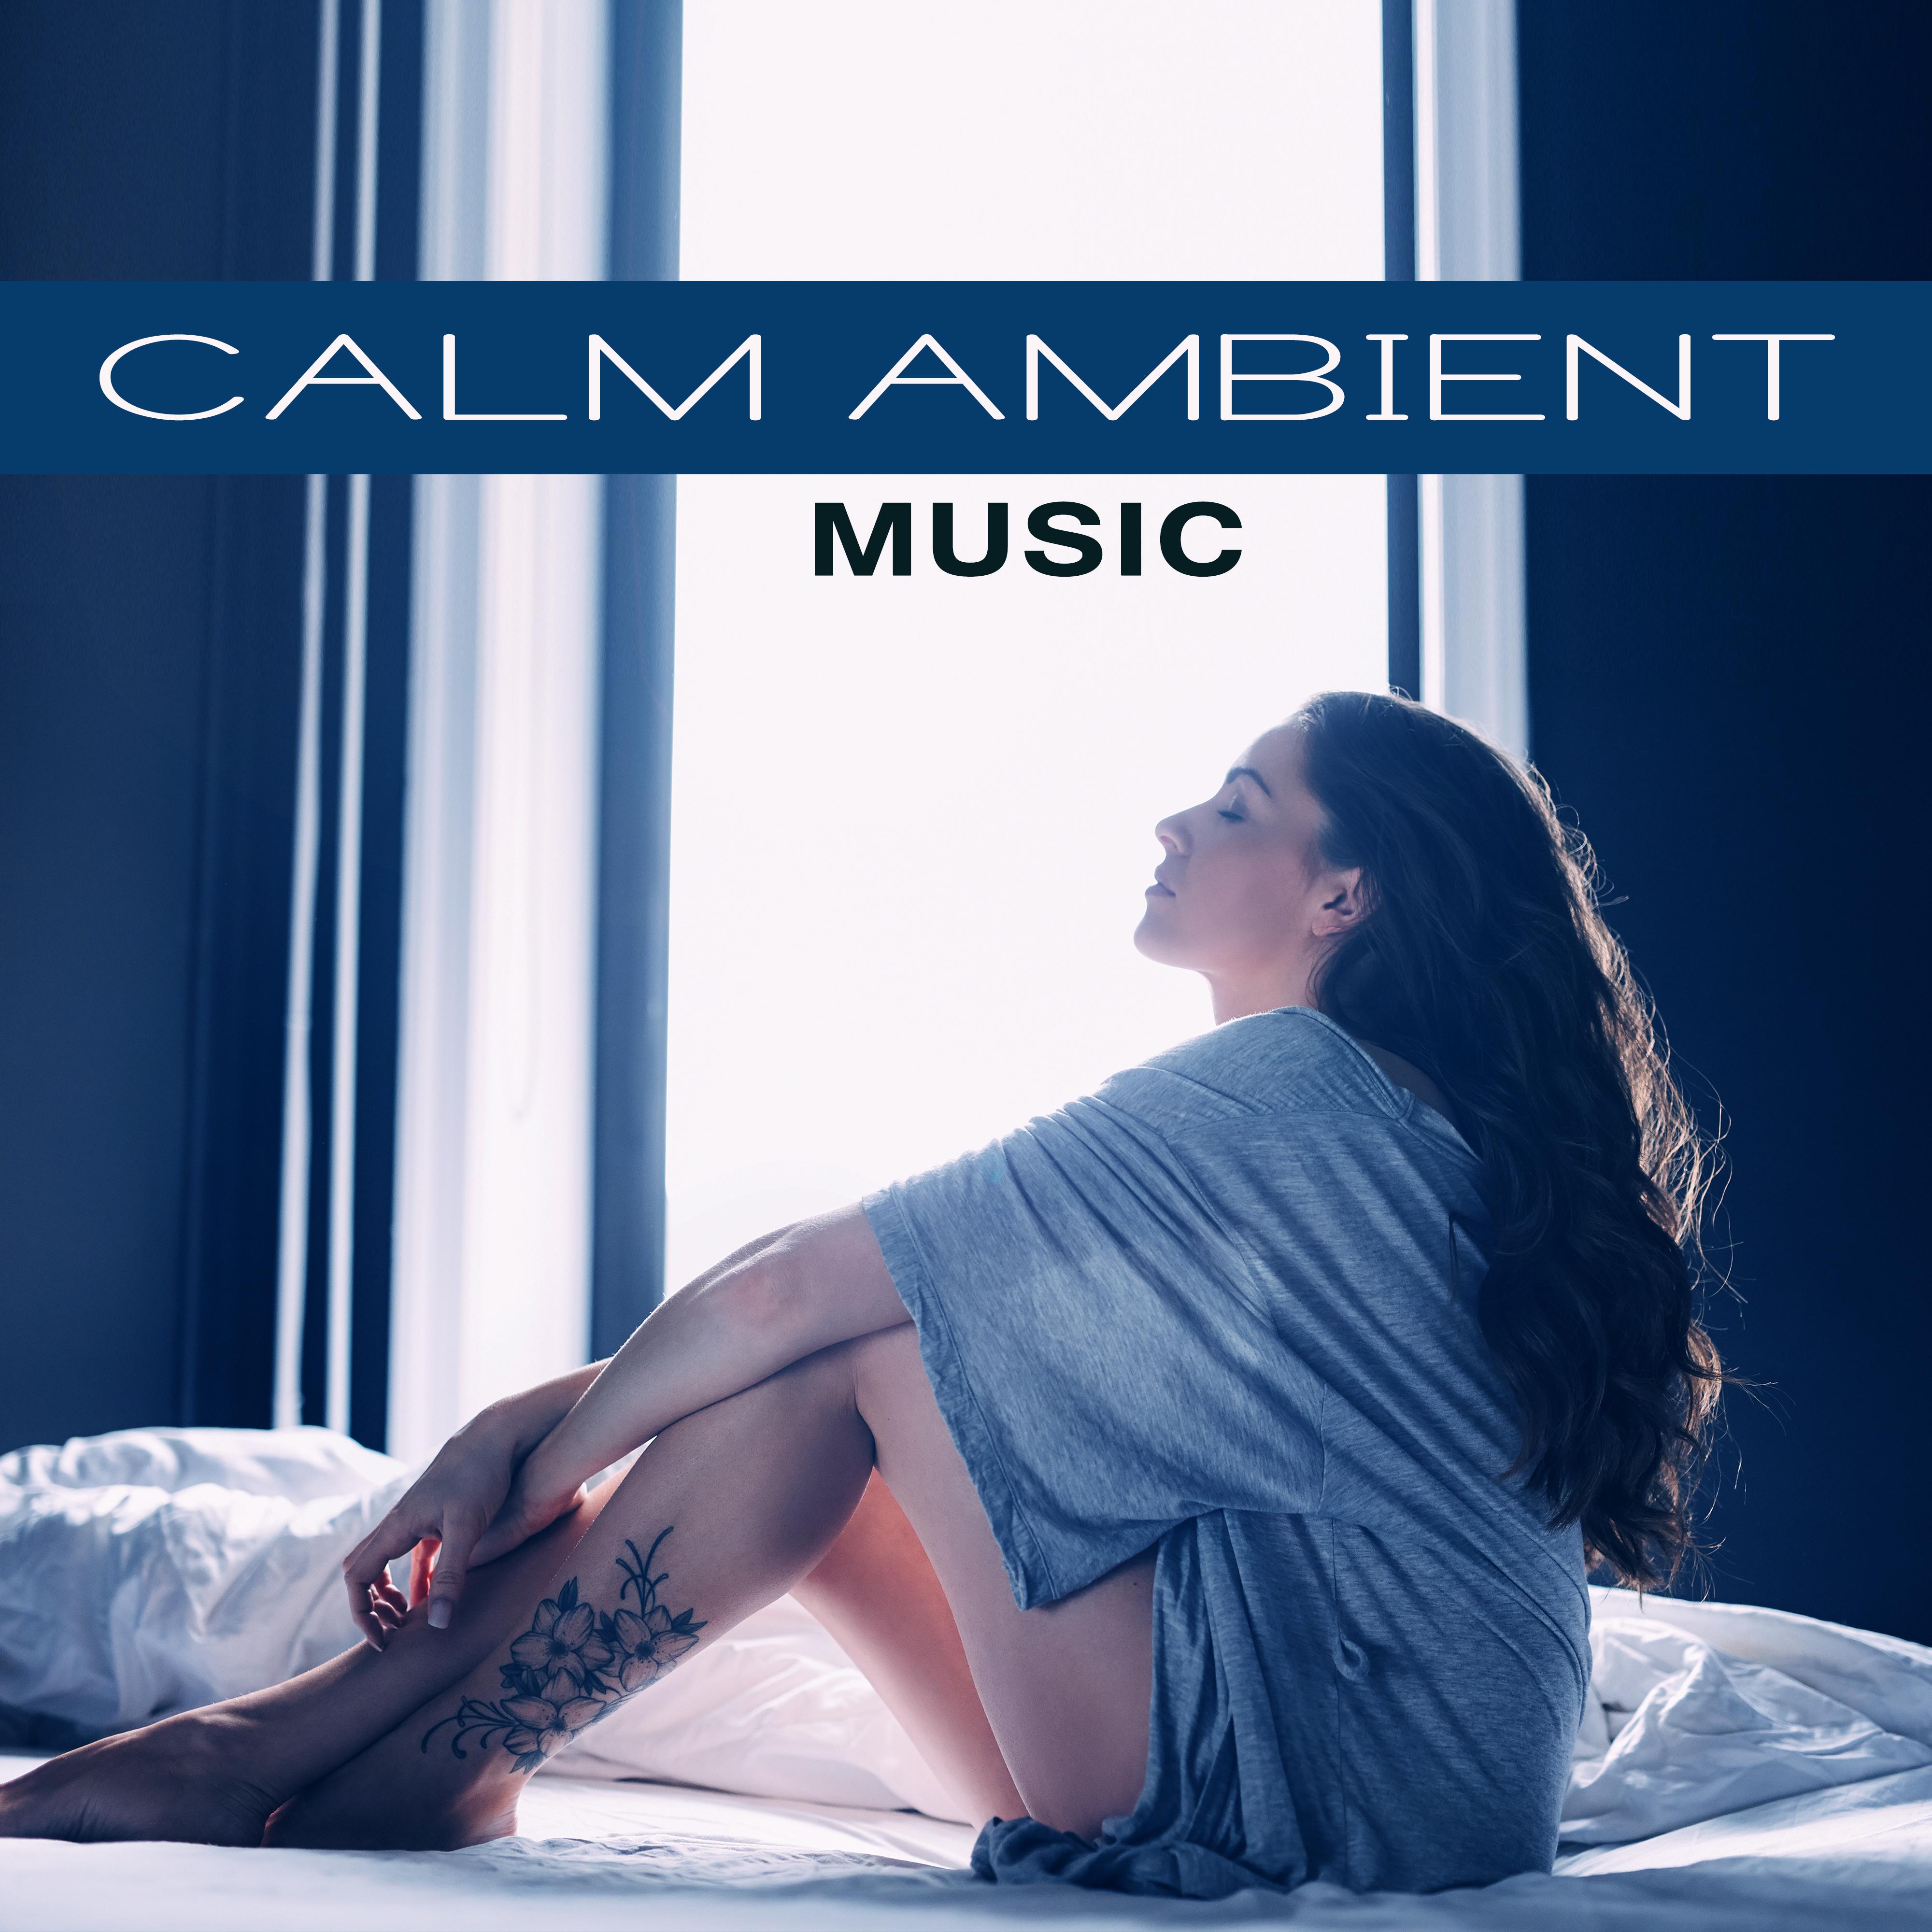 Calm Ambient Music – New Age Relaxation Stress Relief, Peaceful Waves, Chilled Melodies